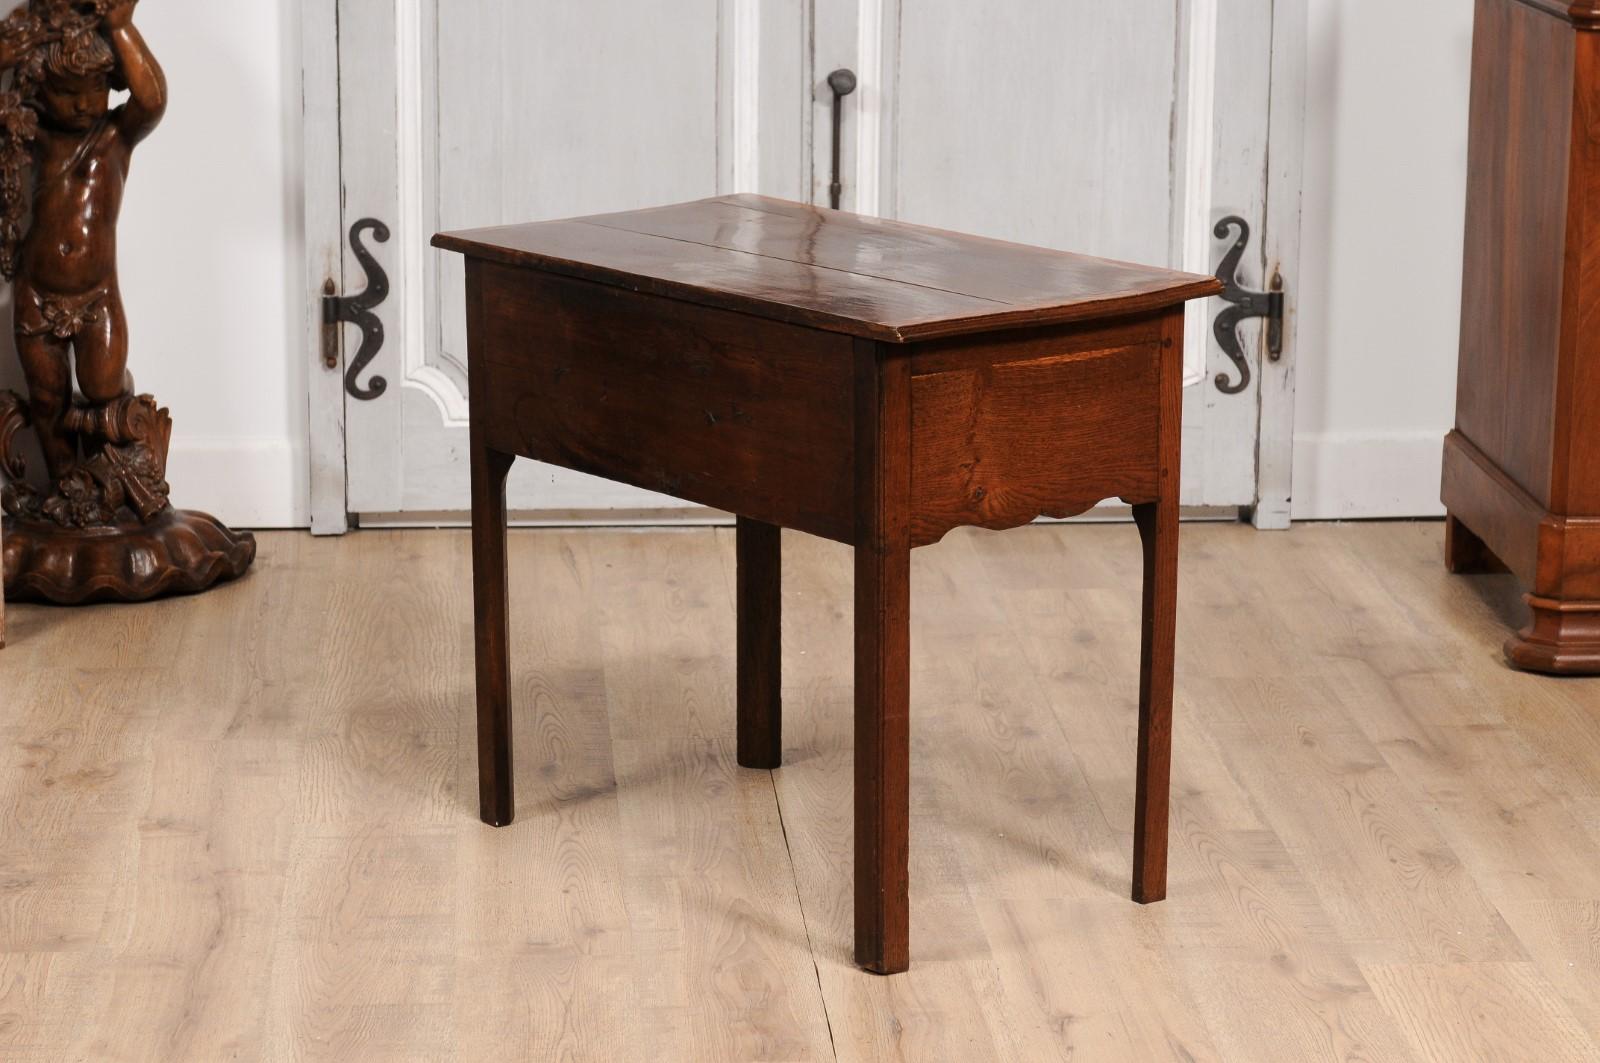 English Georgian Period 18th Century Oak Lowboy Side Table with Carved Apron For Sale 4